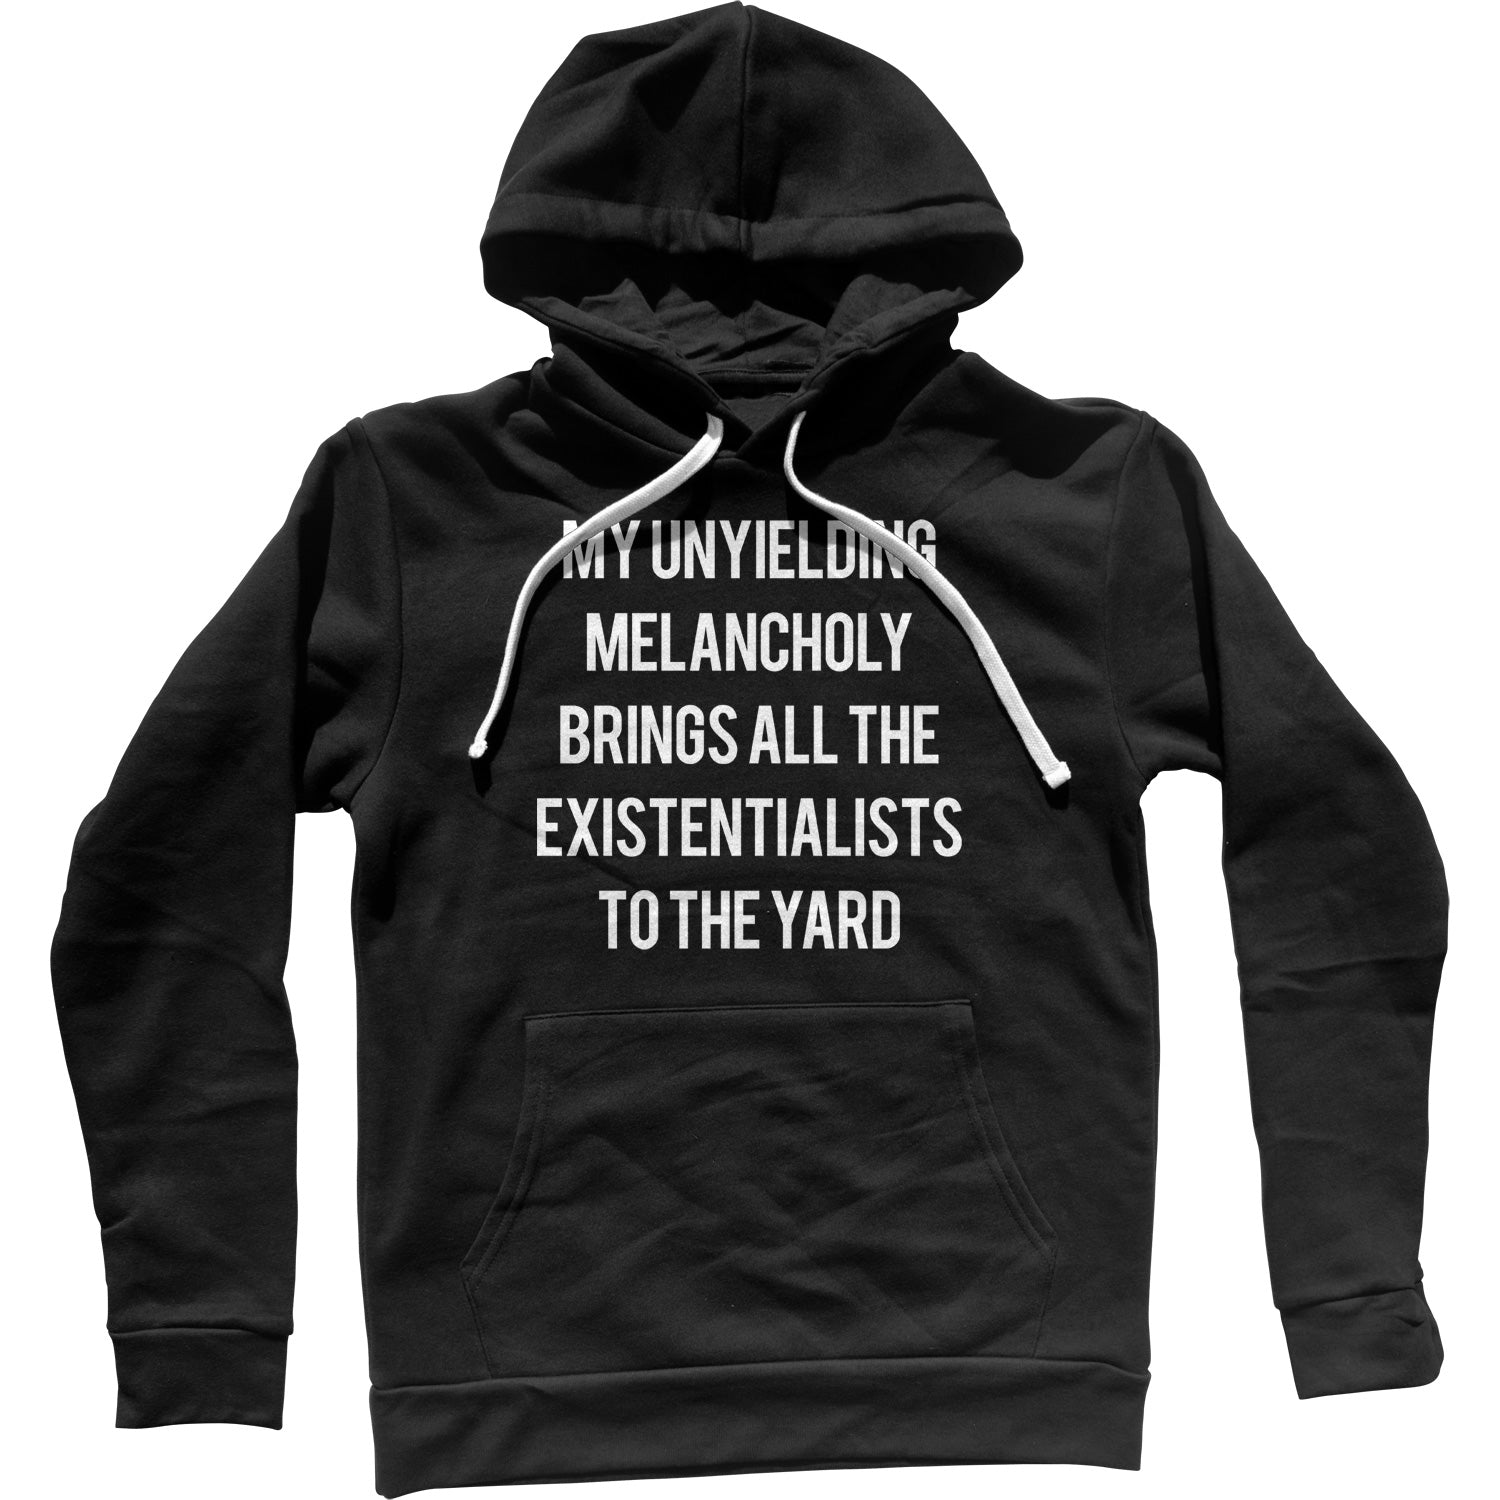 My Unyielding Melancholy Brings All The Existentialists To The Yard Unisex Hoodie